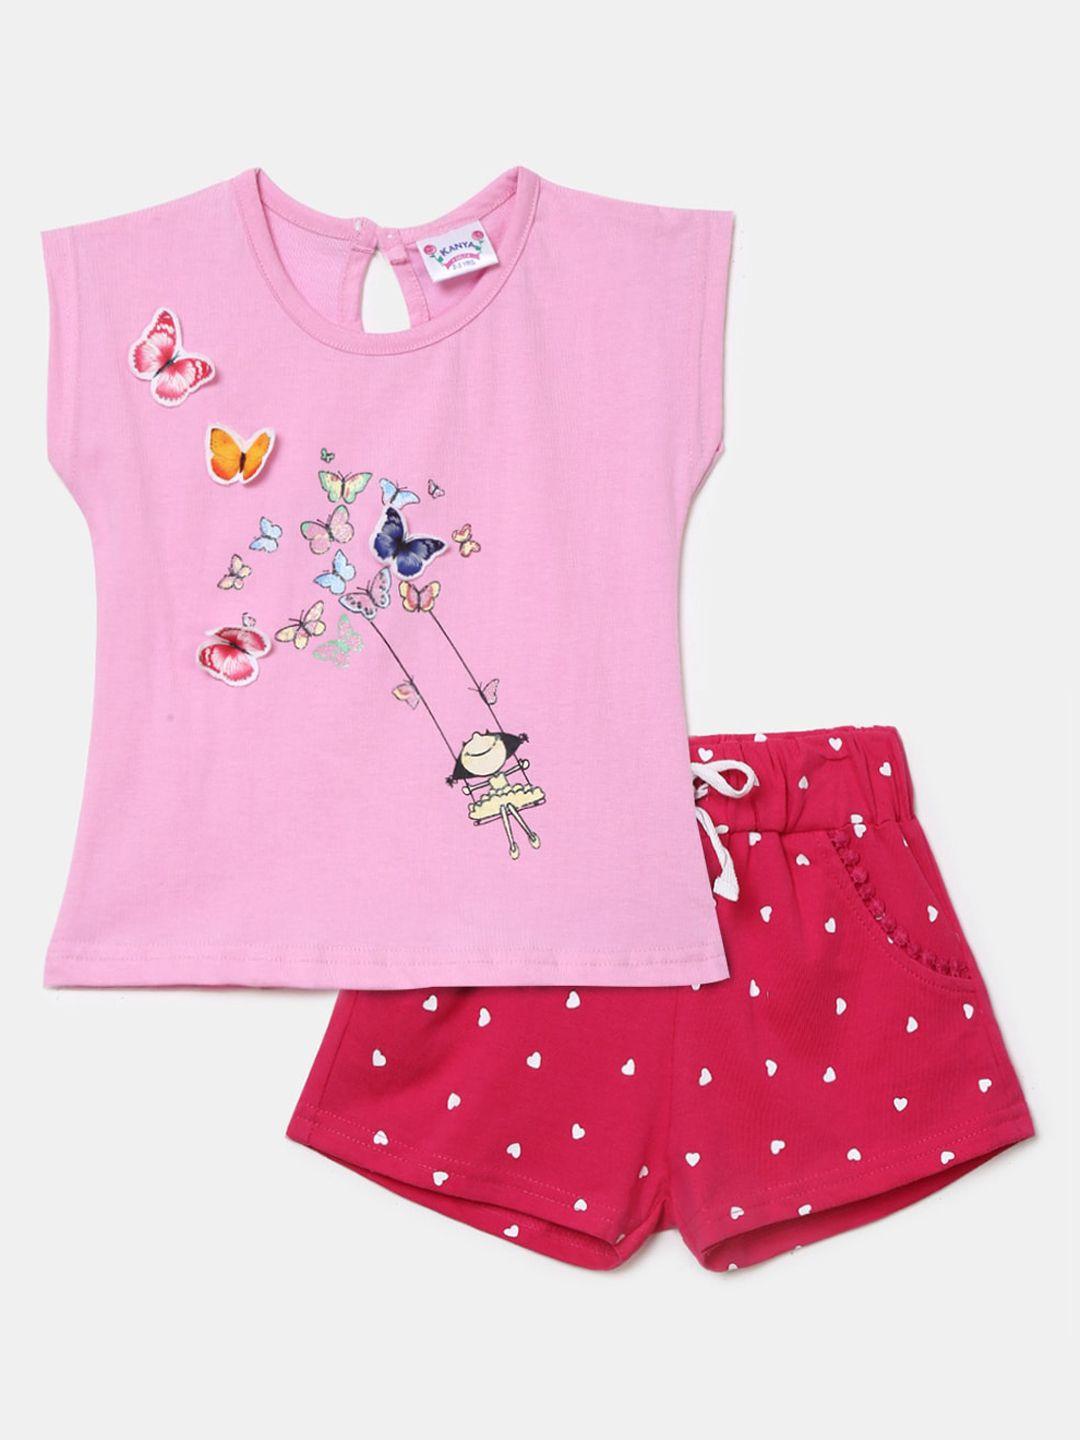 v-mart girls printed pure cotton t-shirt with shorts